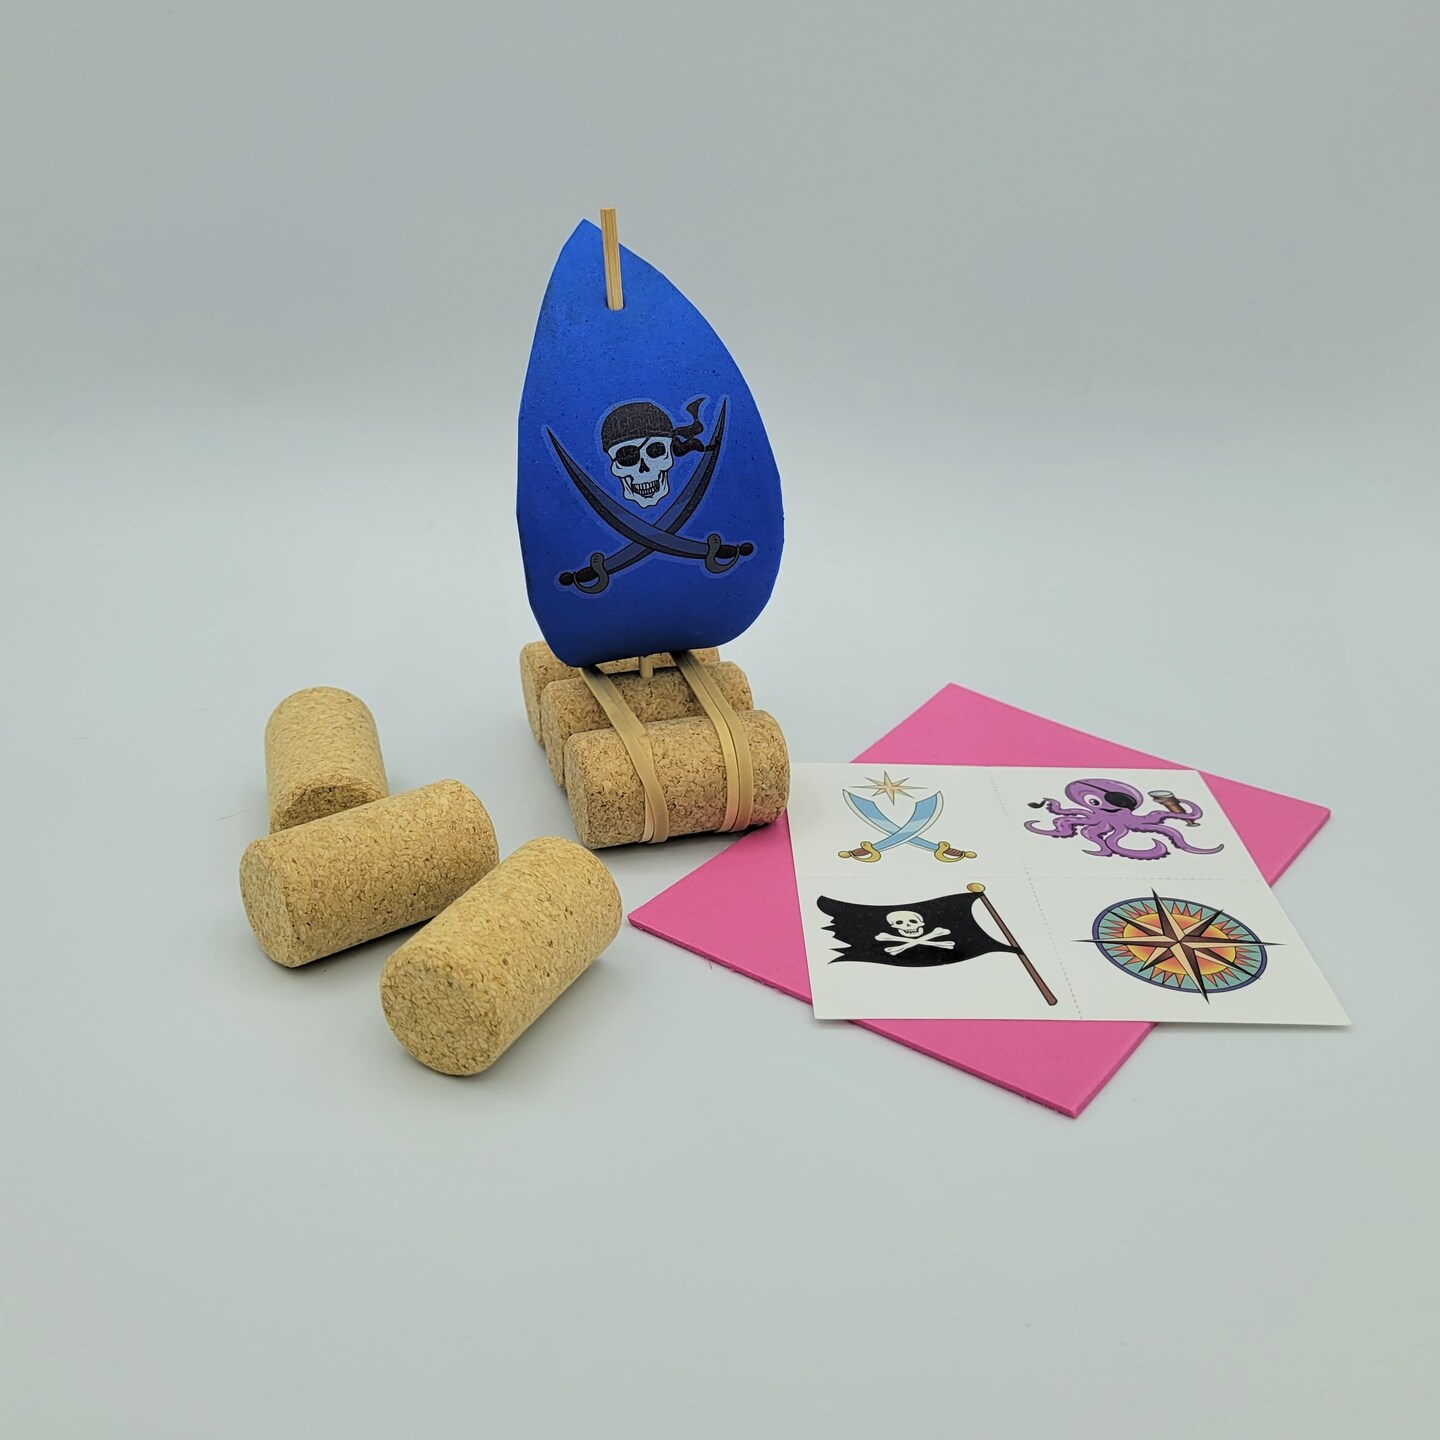 Ink and Trinket Kids Cork Boat Craft Kit, Individually Packaged